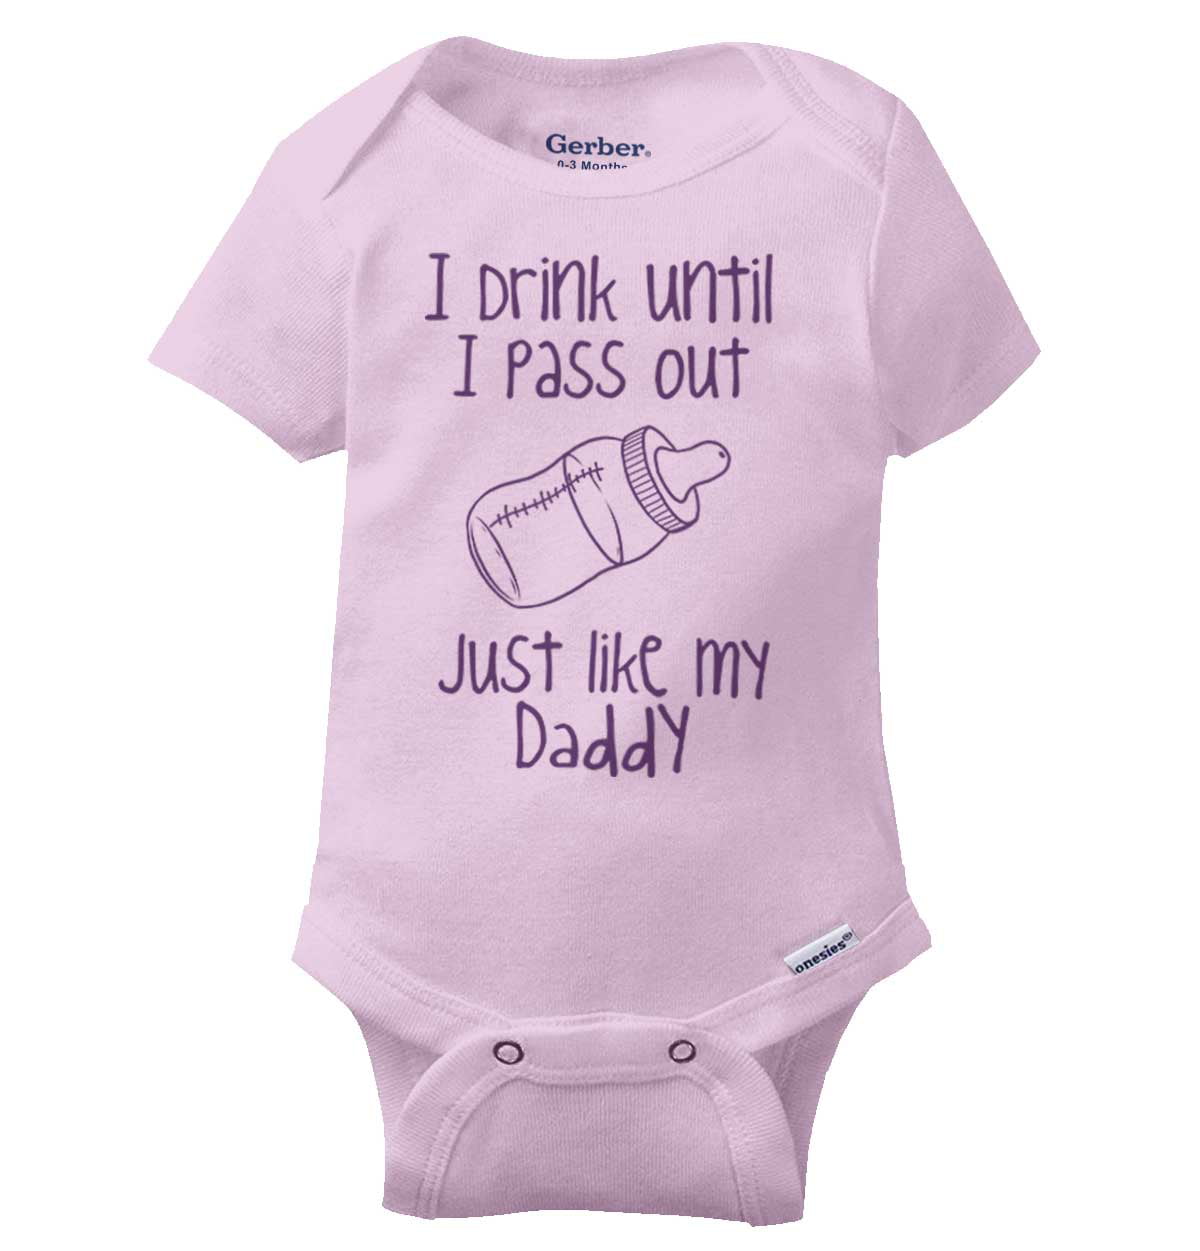 Details about   I Take After Mom & Dad & Drink From A Bottle Baby Infant Bodysuit Toddler Outfit 